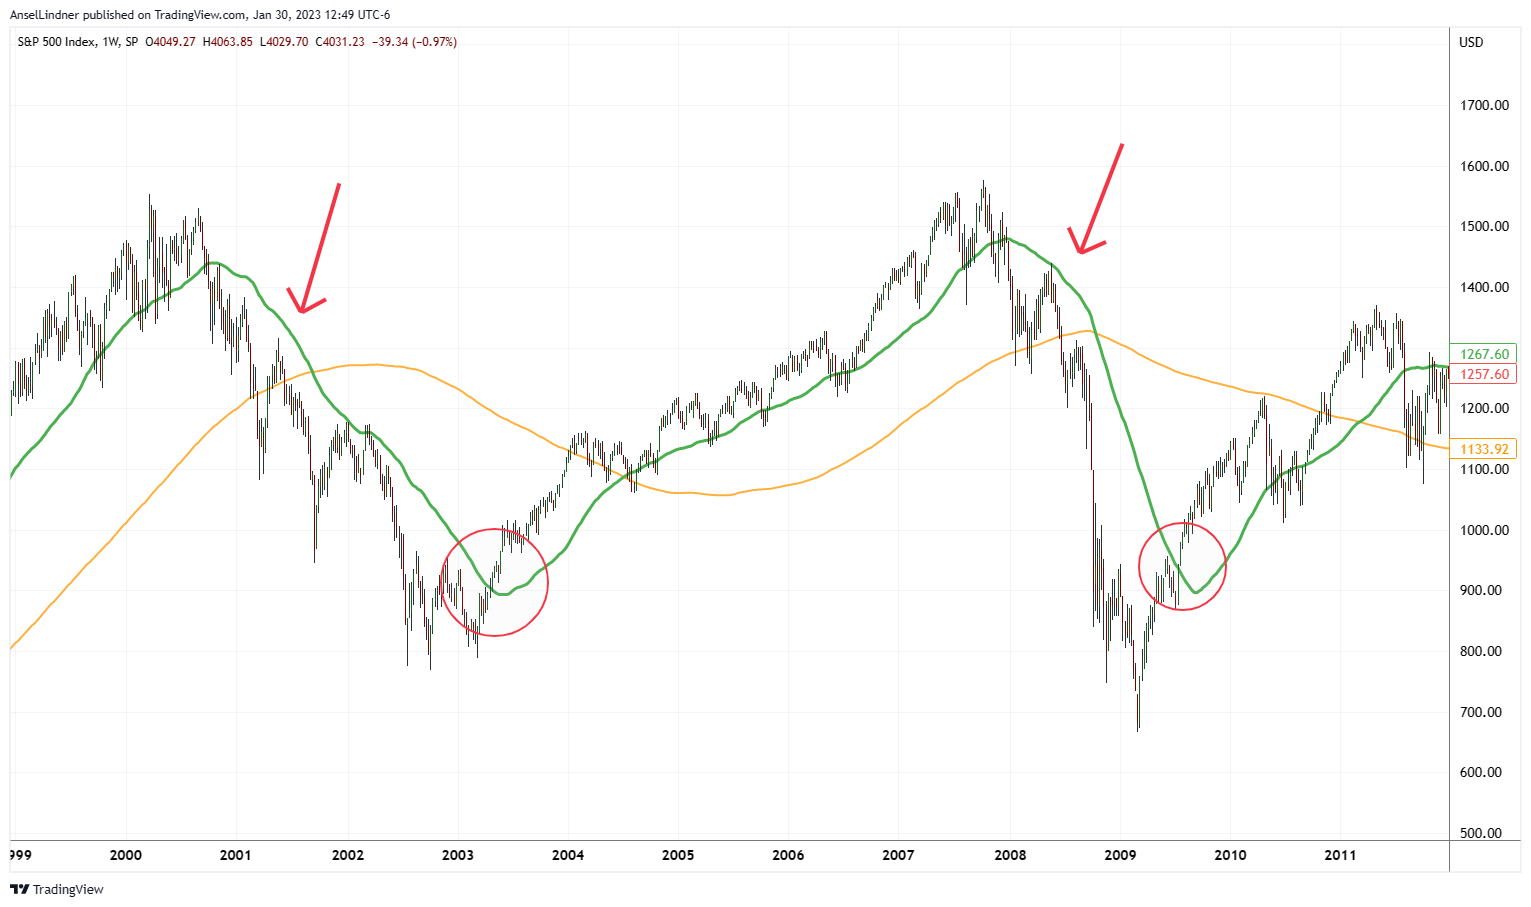 S&P 500 long term view of 50 and 200-week moving averages